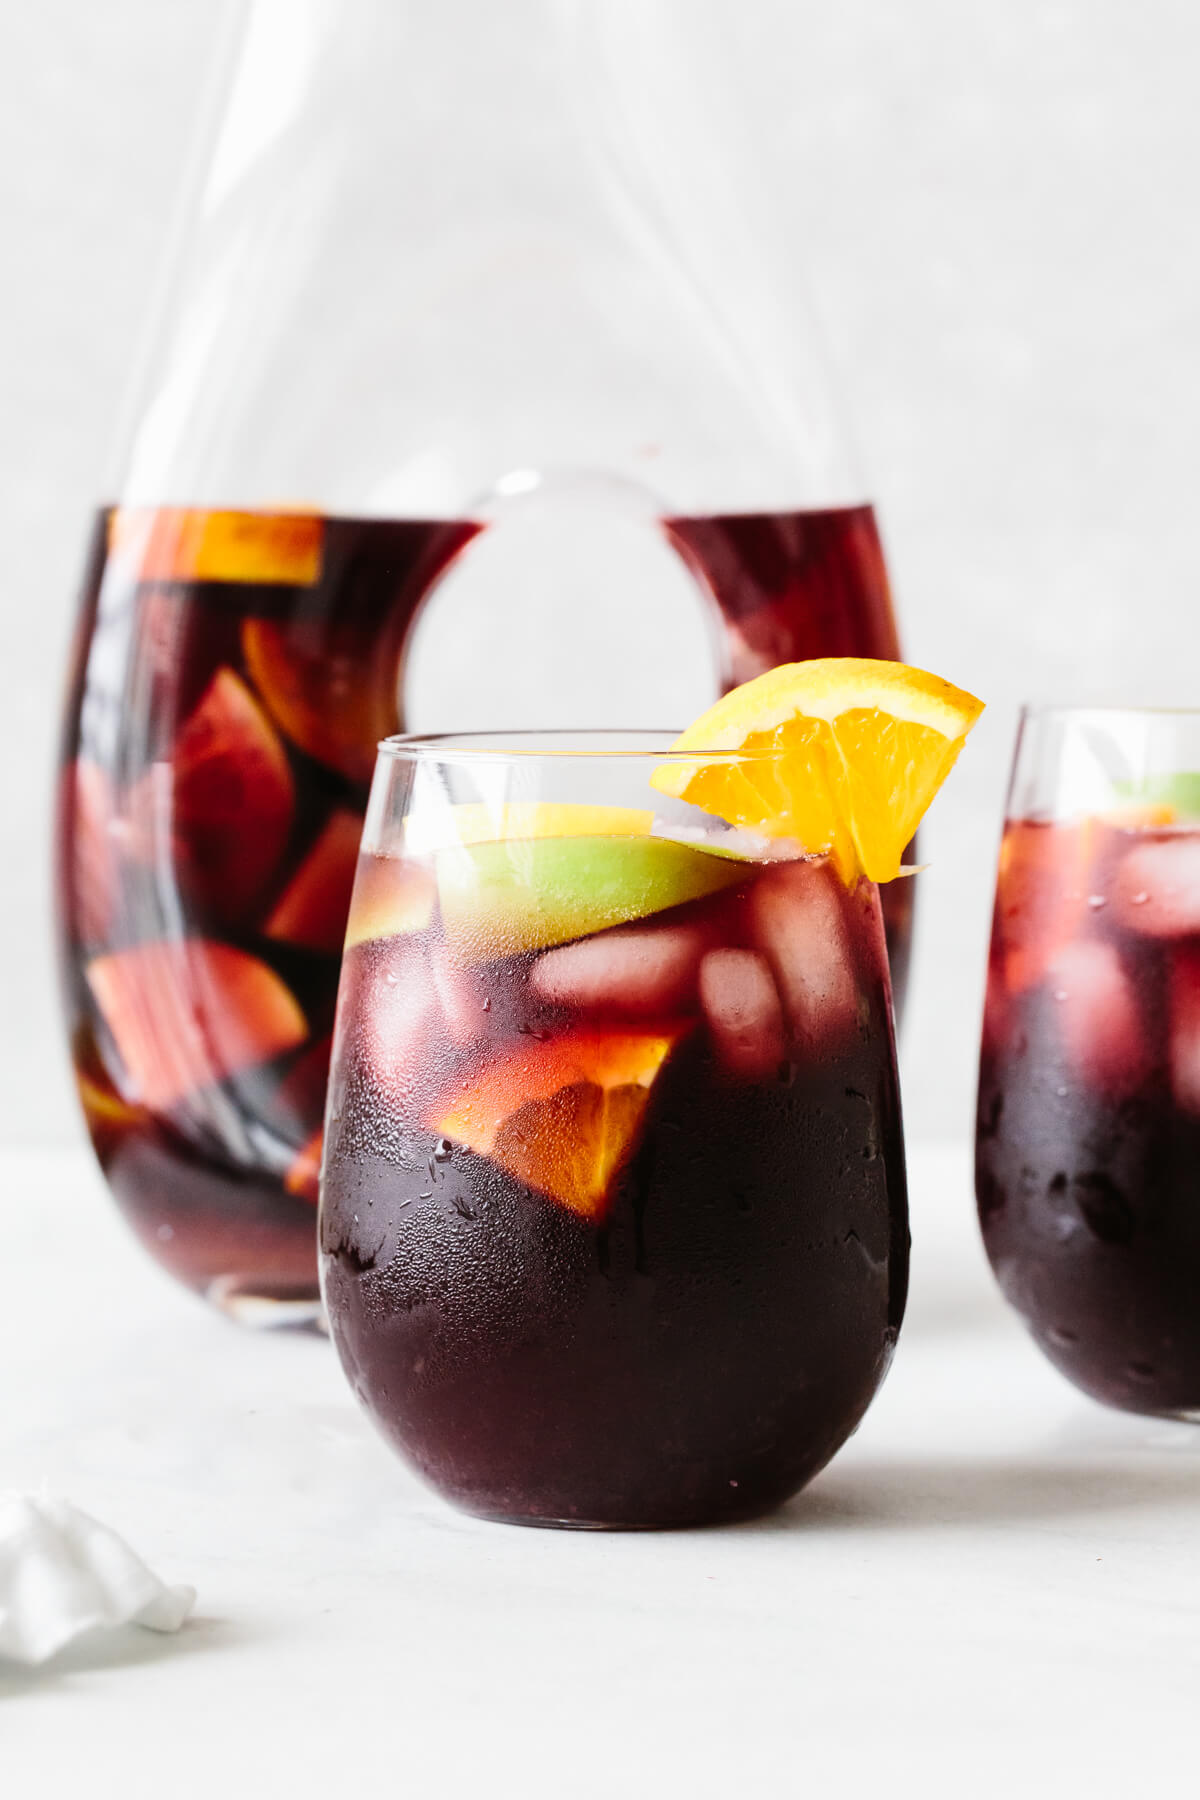 Red sangria in a glass with orange slice garnish and pitcher in the background.